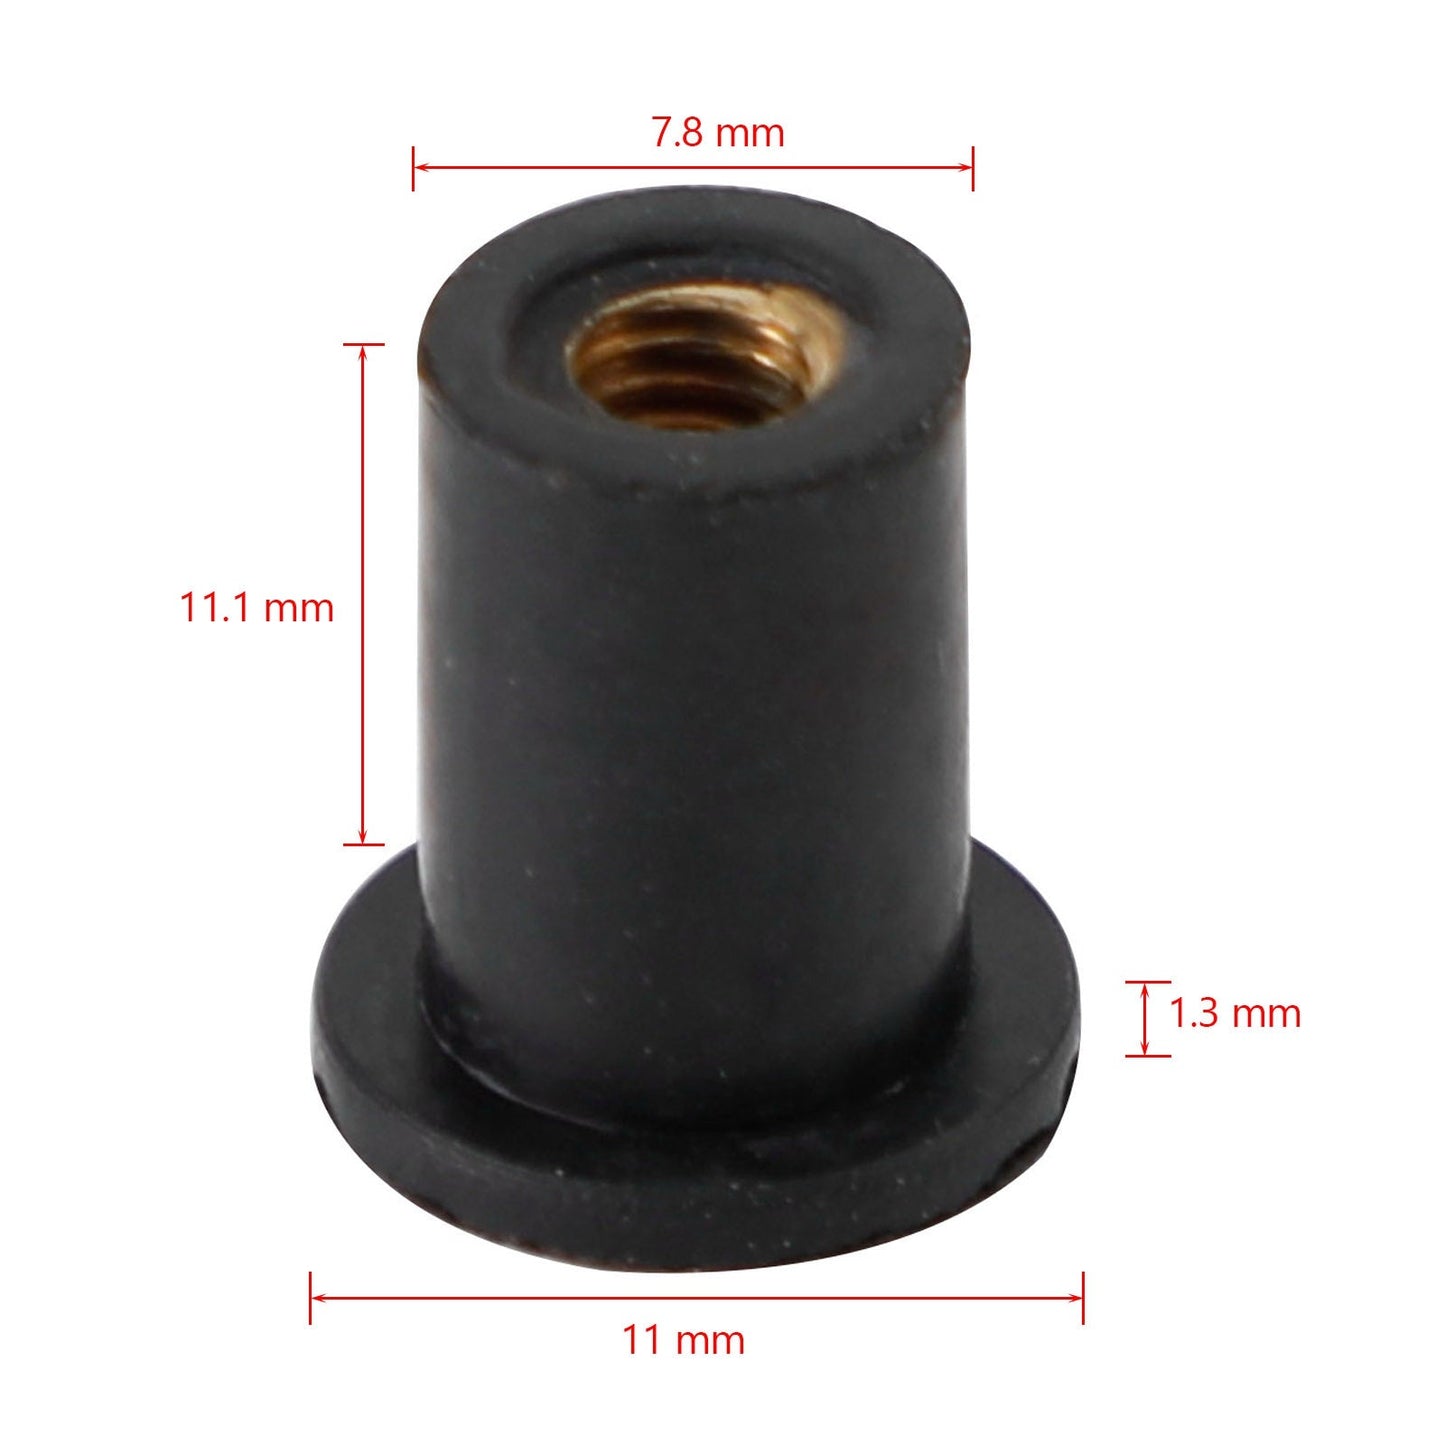 M4 Rubber Well Nuts Wellnuts for Fairing & Screen Fixing Pack of 20 - 8mm Hole